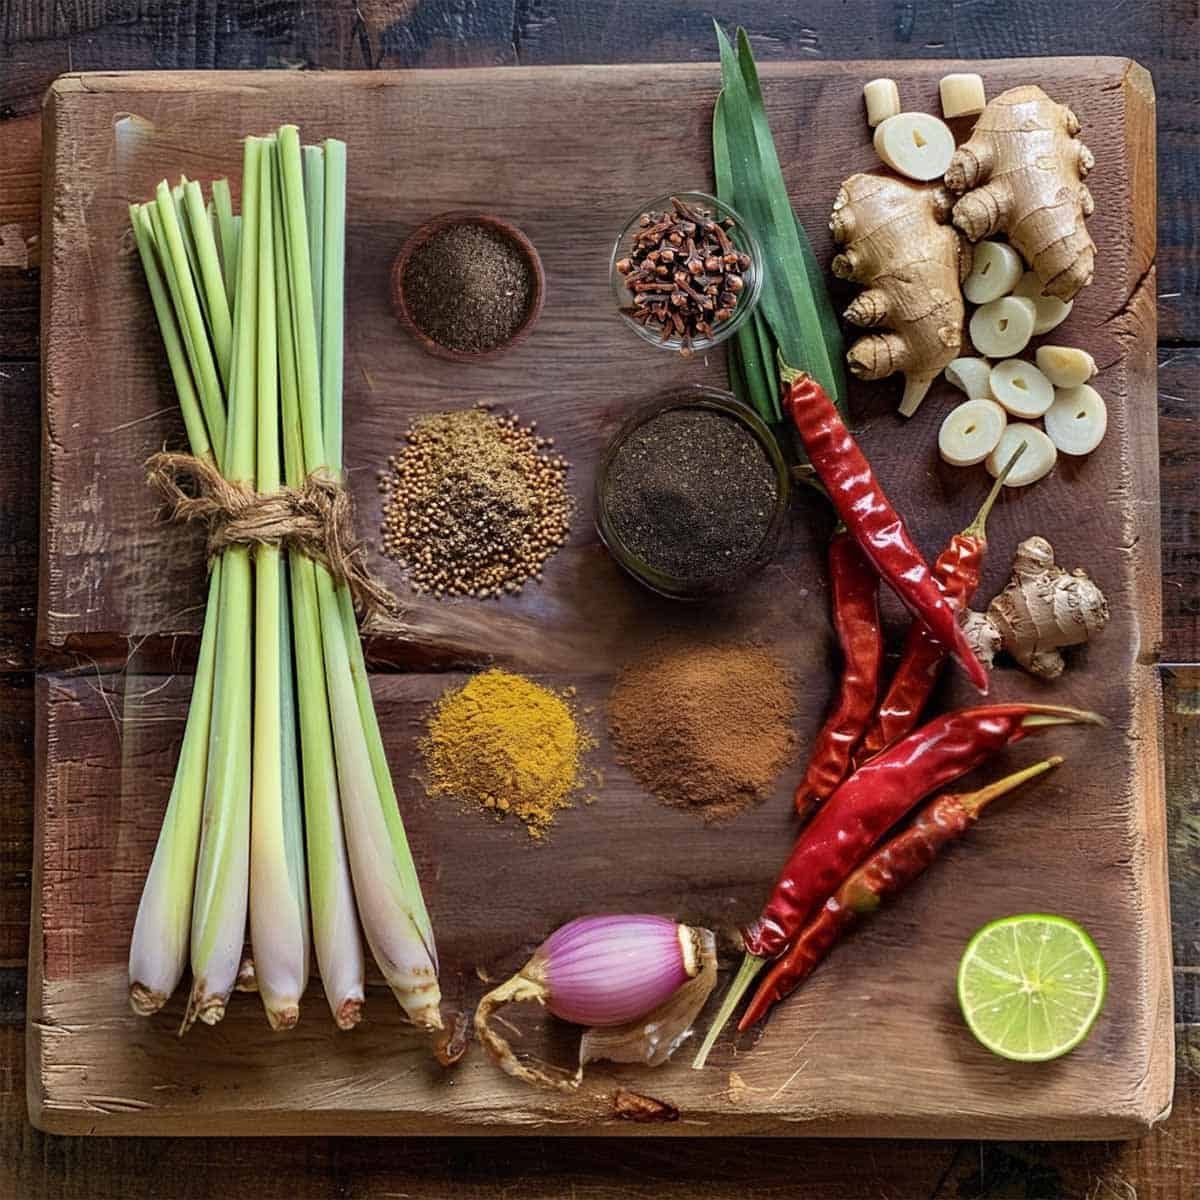 Fresh ingredients displayed for homemade Massaman Curry Paste recipe , including lemongrass, galangal, spices, and herbs arranged on a wooden surface